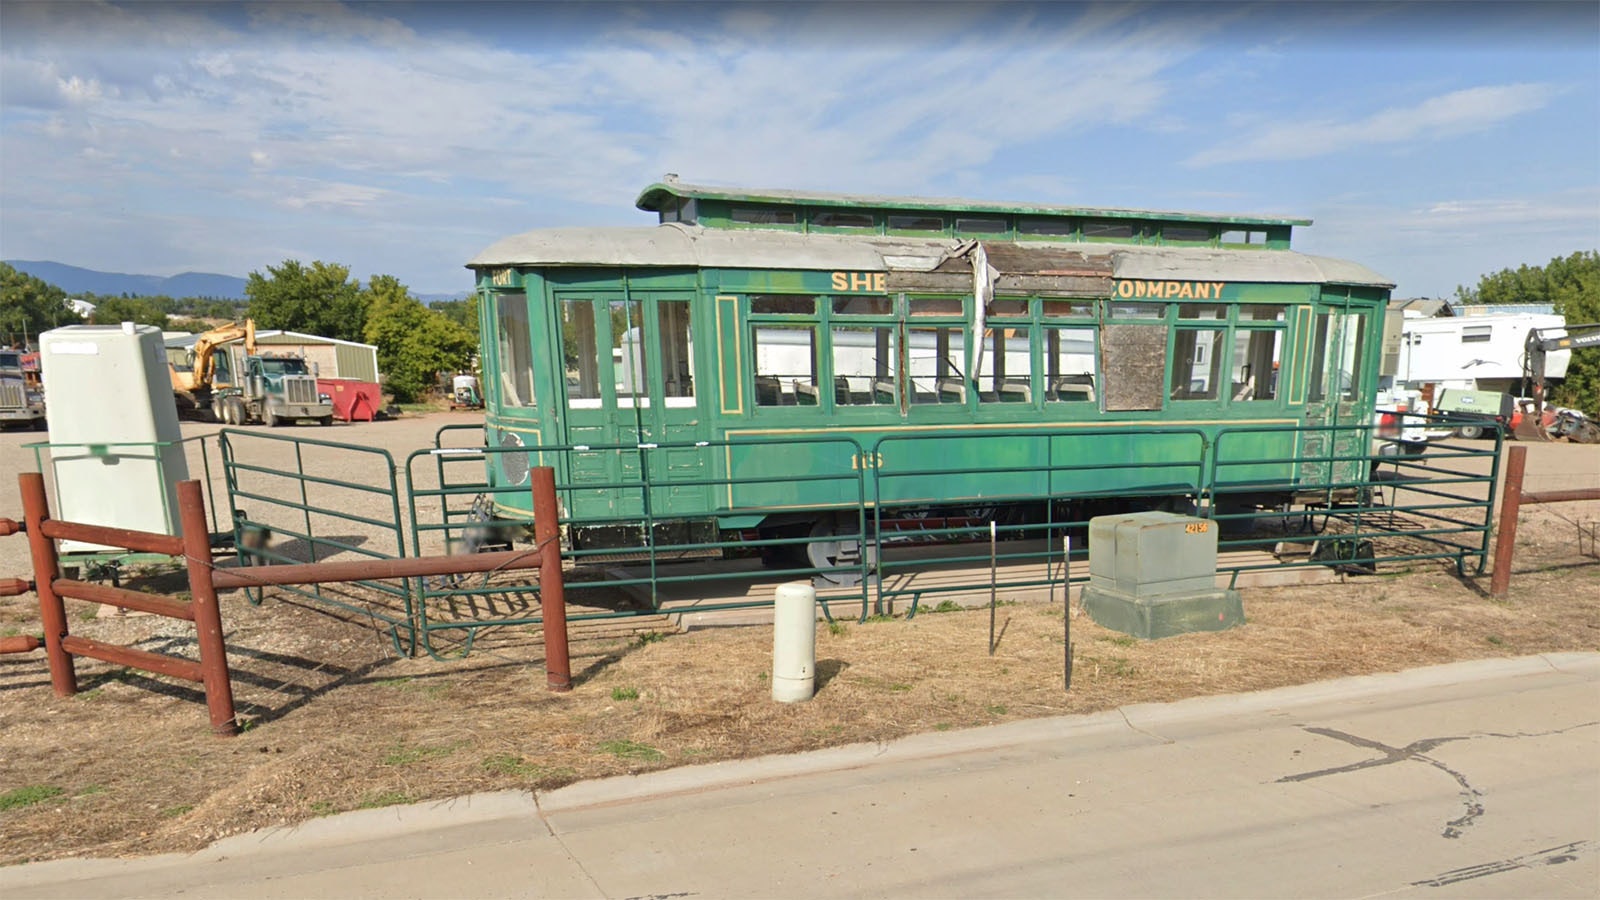 The lone remaining original trolley from those that served Sheridan, Wyoming, more than a century ago sits on the private property on the north side of the city.